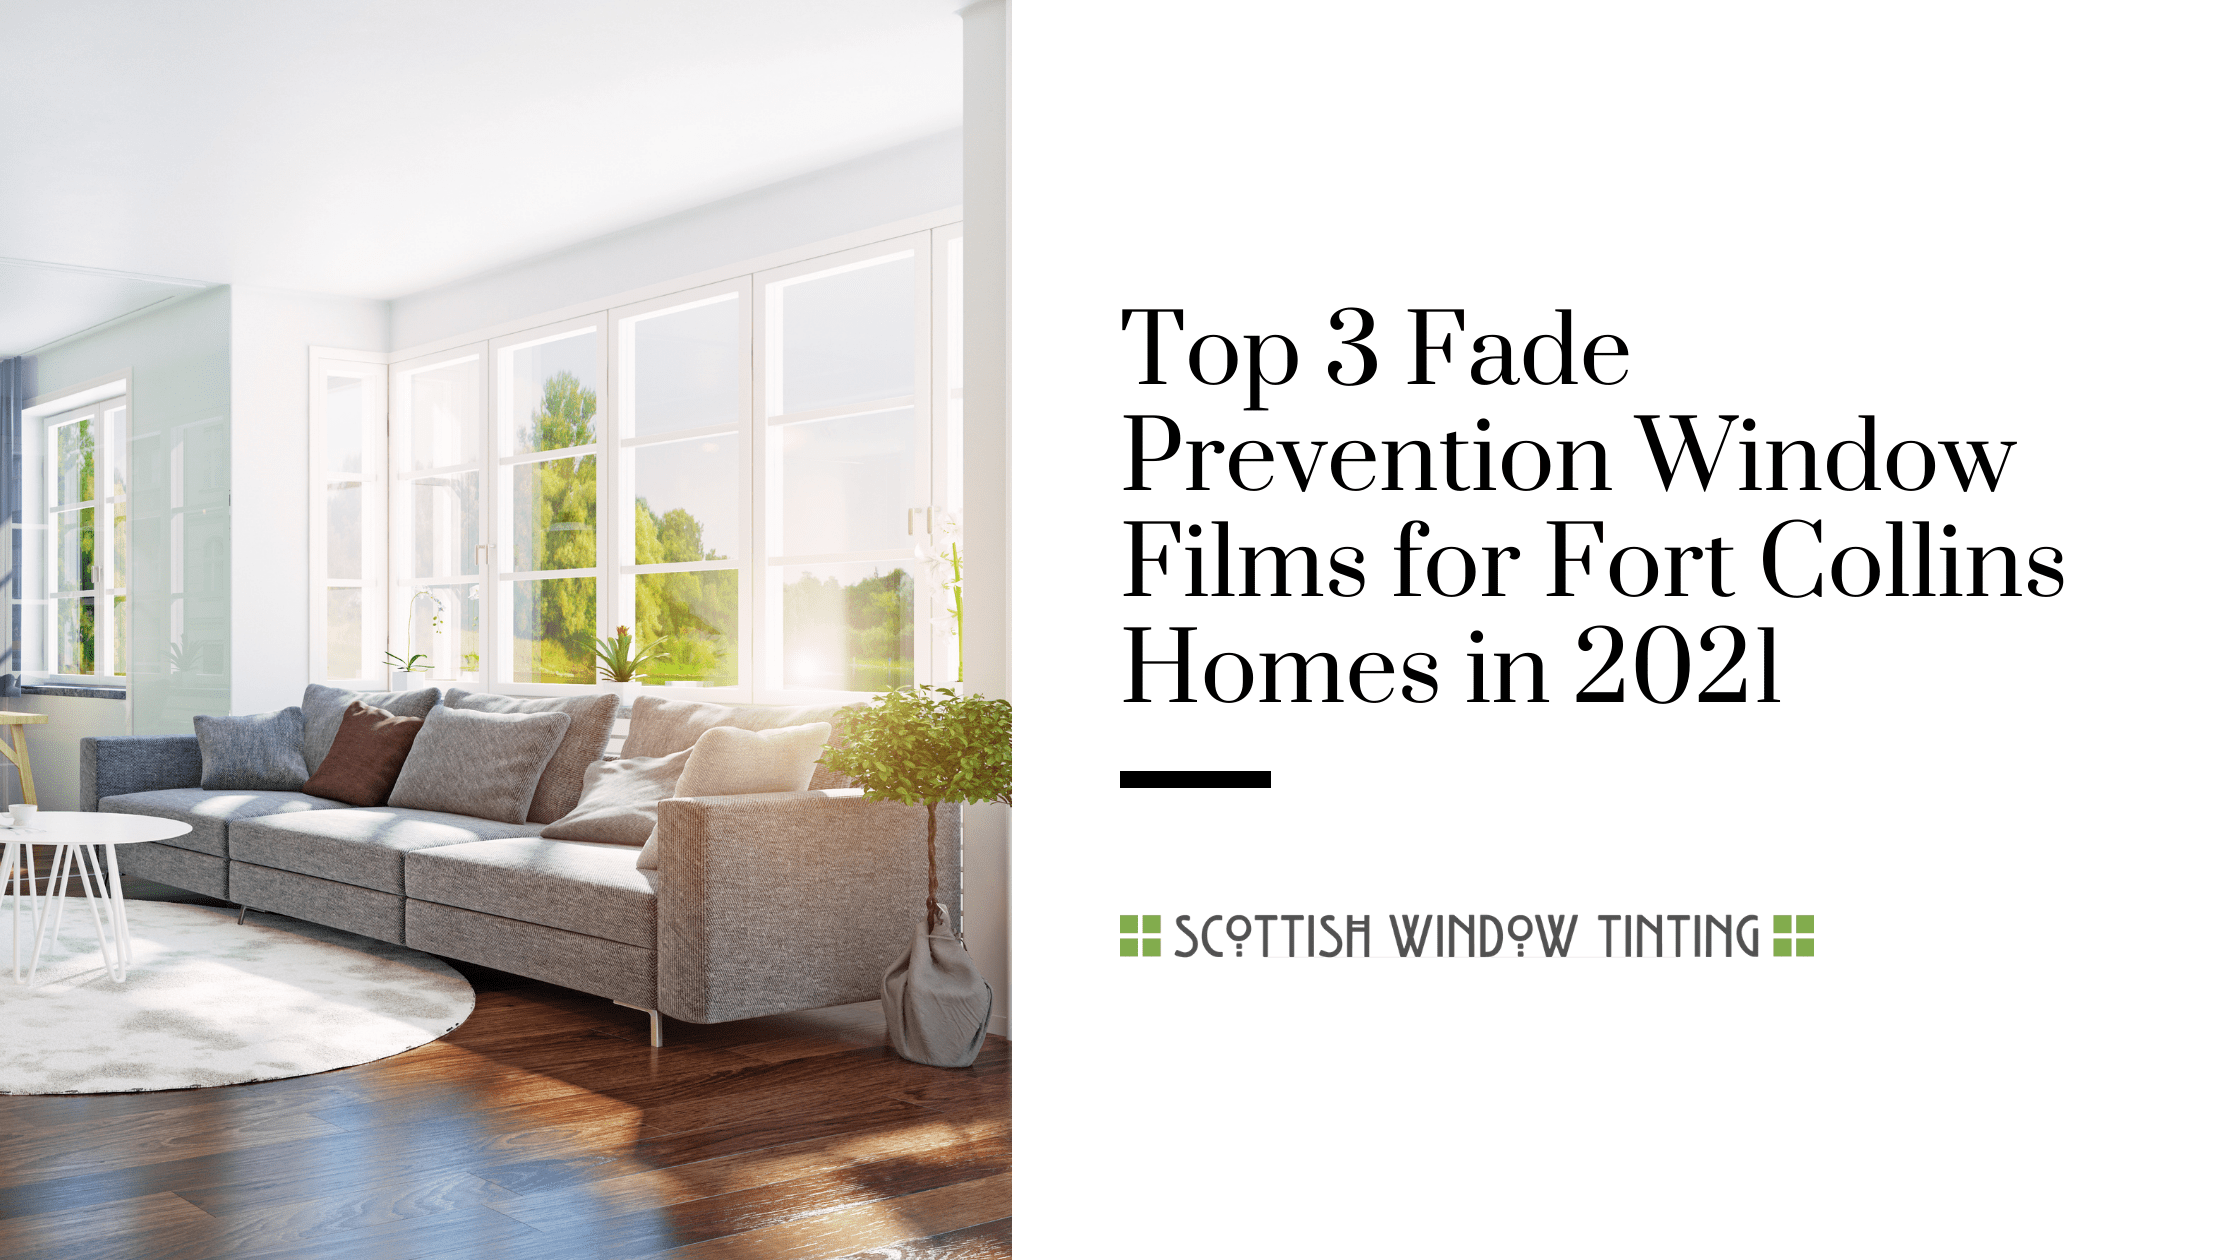 Top 3 Fade Prevention Window Films for Fort Collins Homes in 2021